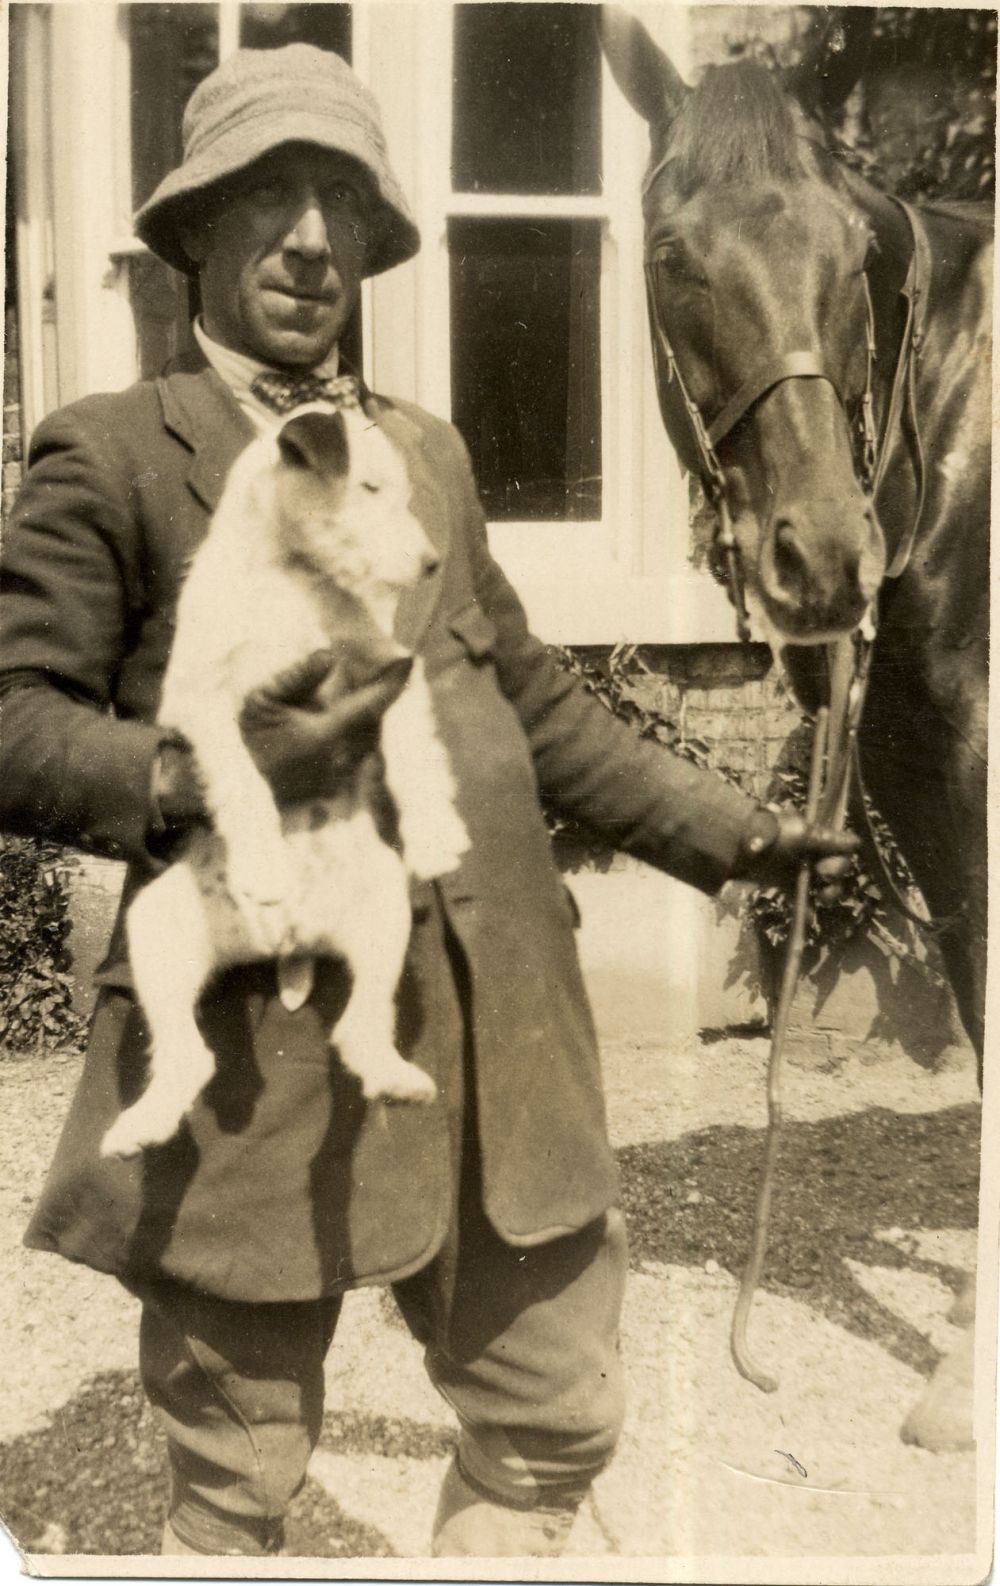 Mr Wheatley with dog and horse